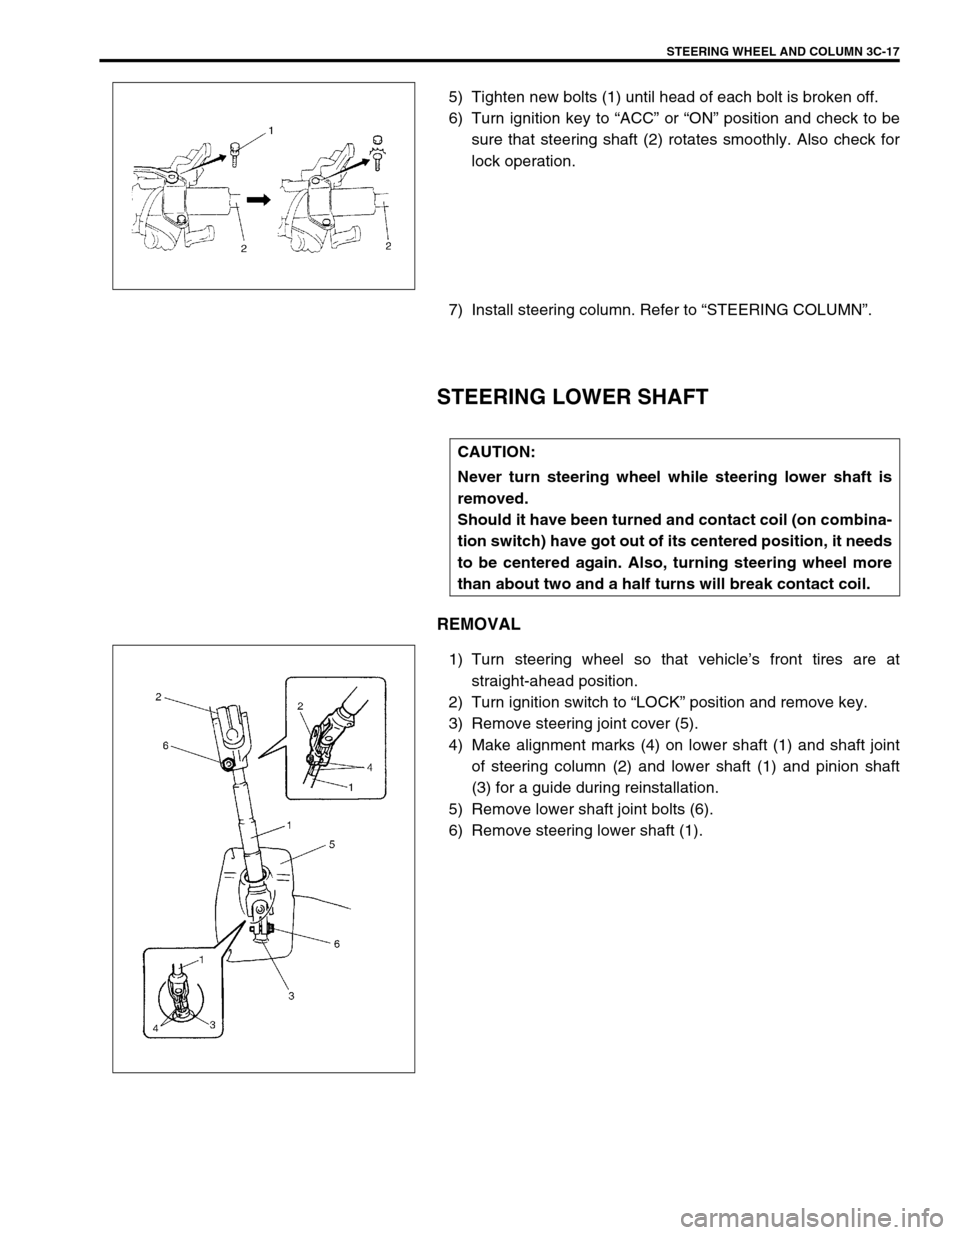 SUZUKI SWIFT 2000 1.G RG413 Service Workshop Manual STEERING WHEEL AND COLUMN 3C-17
5) Tighten new bolts (1) until head of each bolt is broken off.
6) Turn ignition key to “ACC” or “ON” position and check to be
sure that steering shaft (2) rota